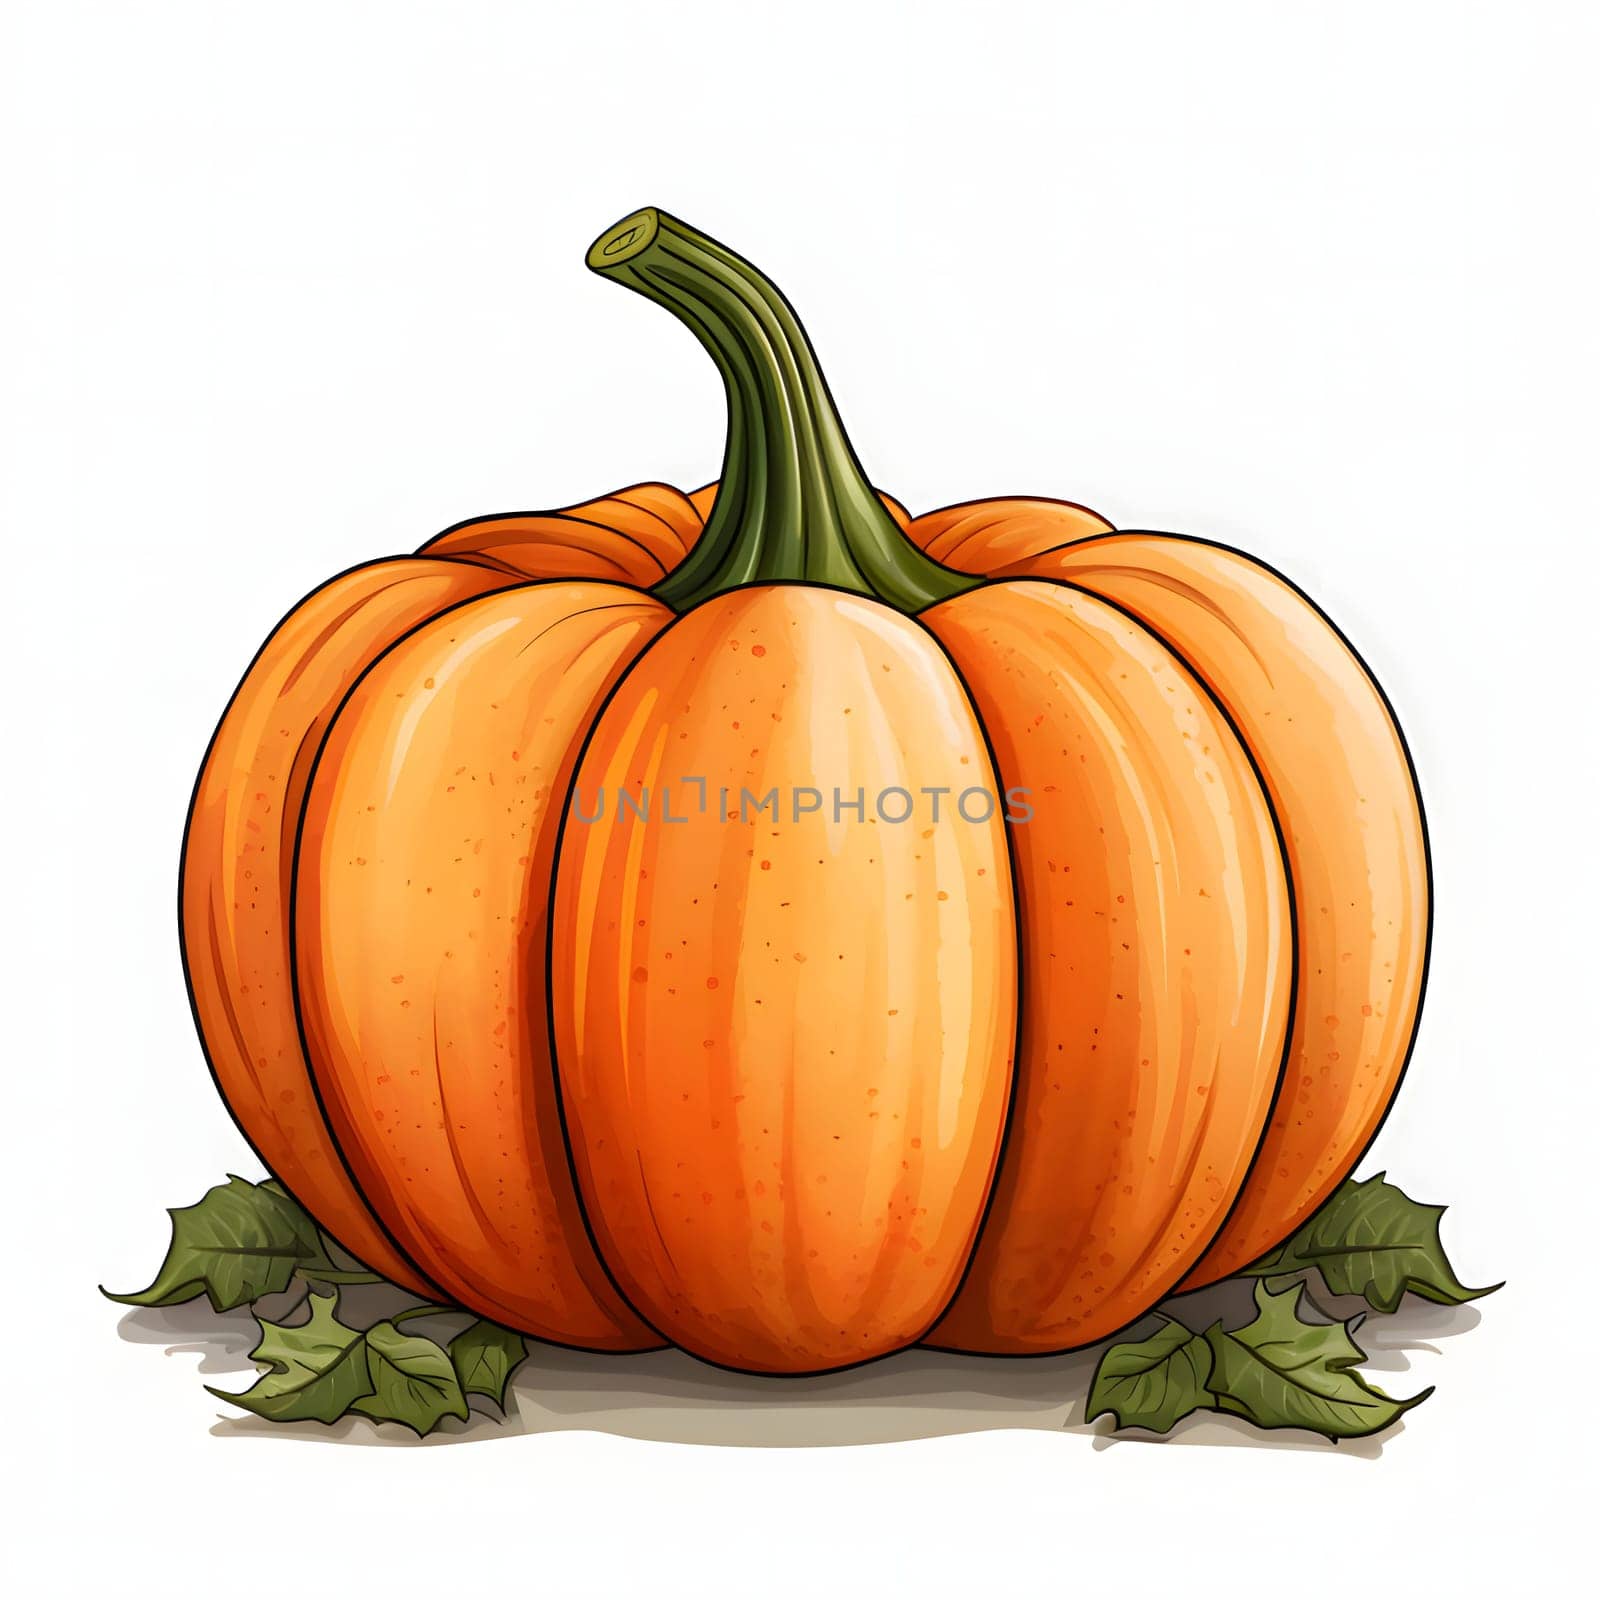 Pumpkin and some leaves. Pumpkin as a dish of thanksgiving for the harvest, picture on a white isolated background. Atmosphere of joy and celebration.